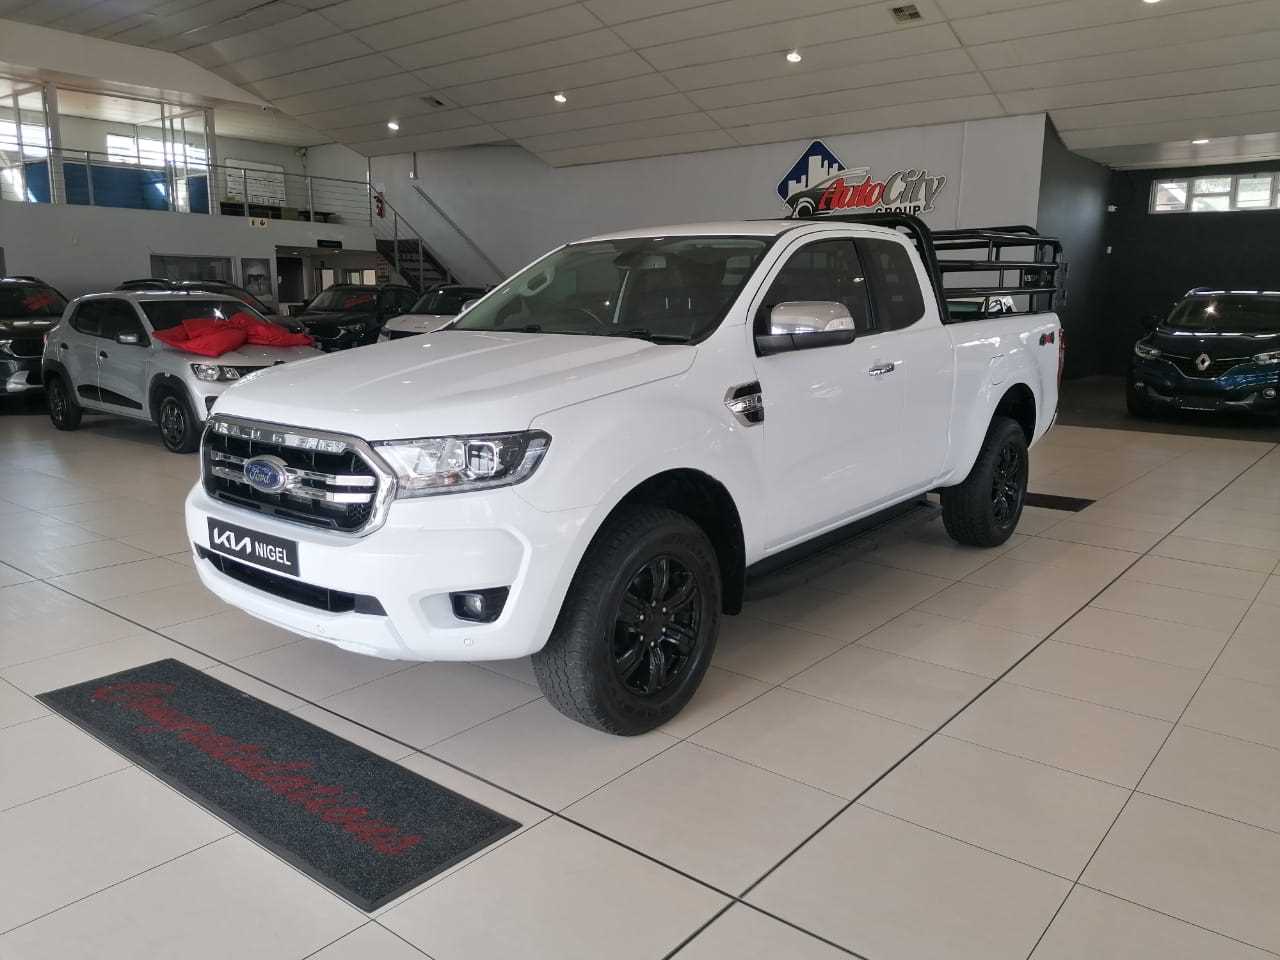 FORD RANGER 3.2TDCi XLT 4X4 A/T P/U SUP/CAB for Sale in South Africa